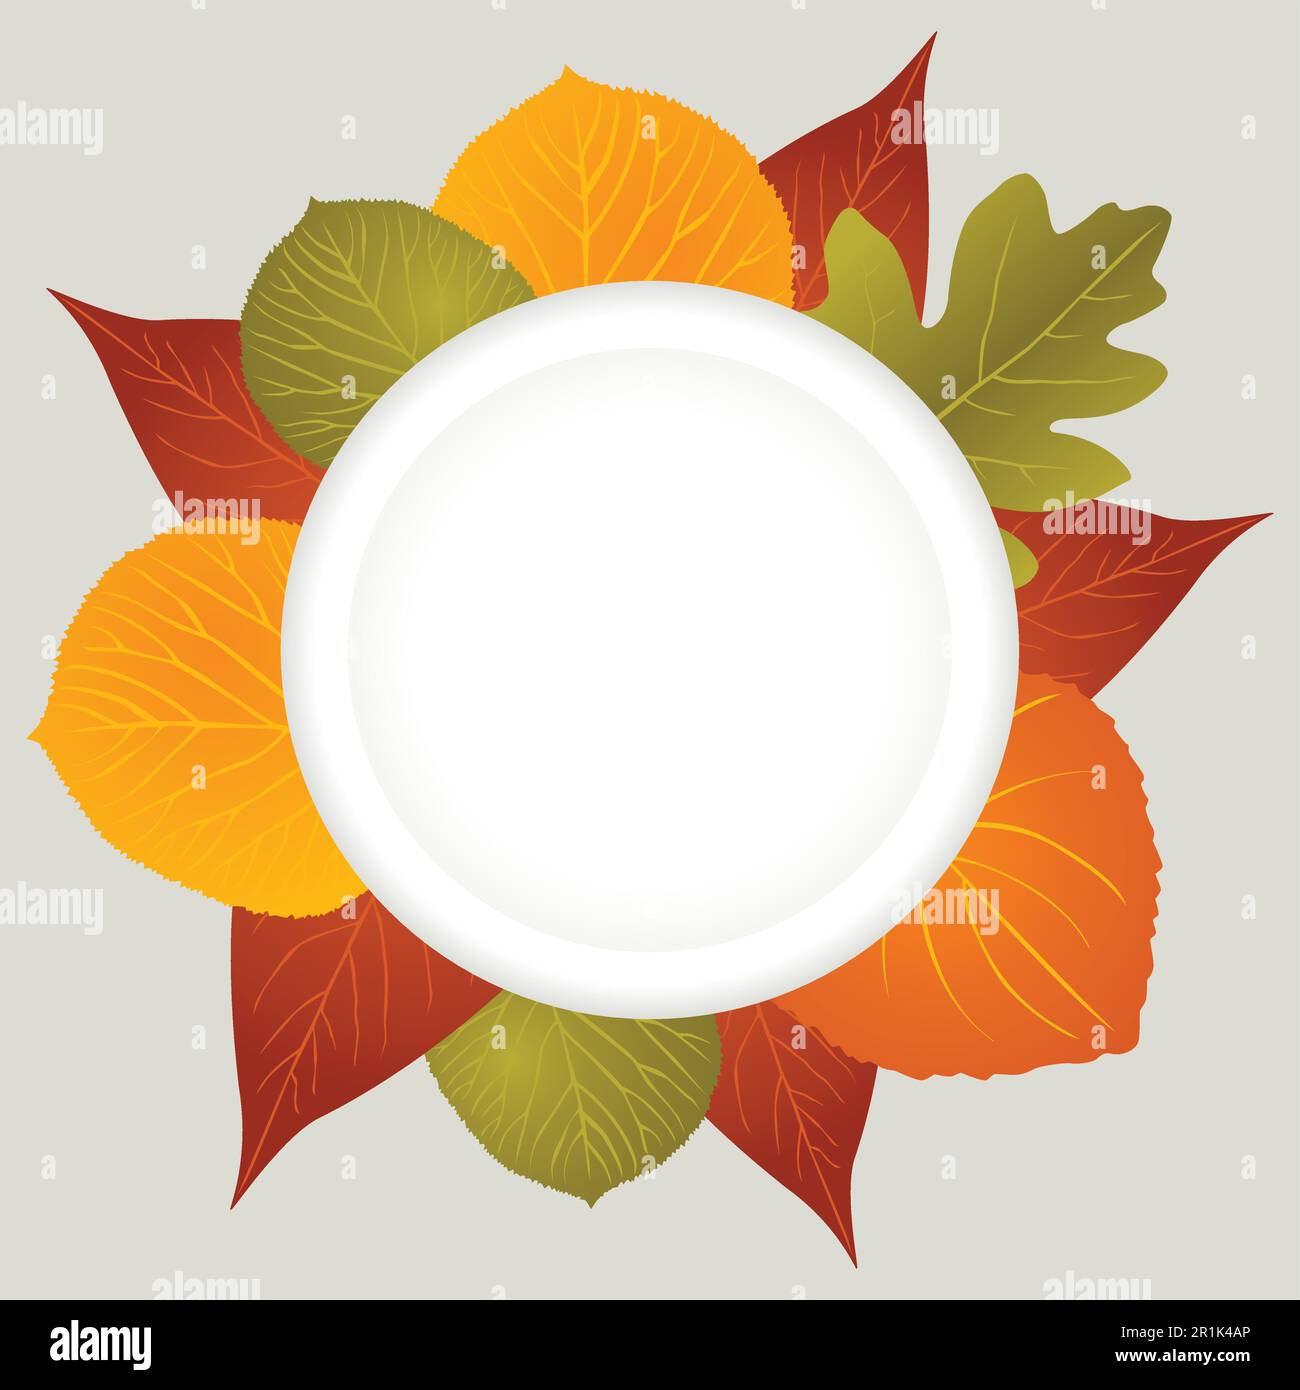 Autumn theme with dried leaves, autumn decorative background Stock Vector